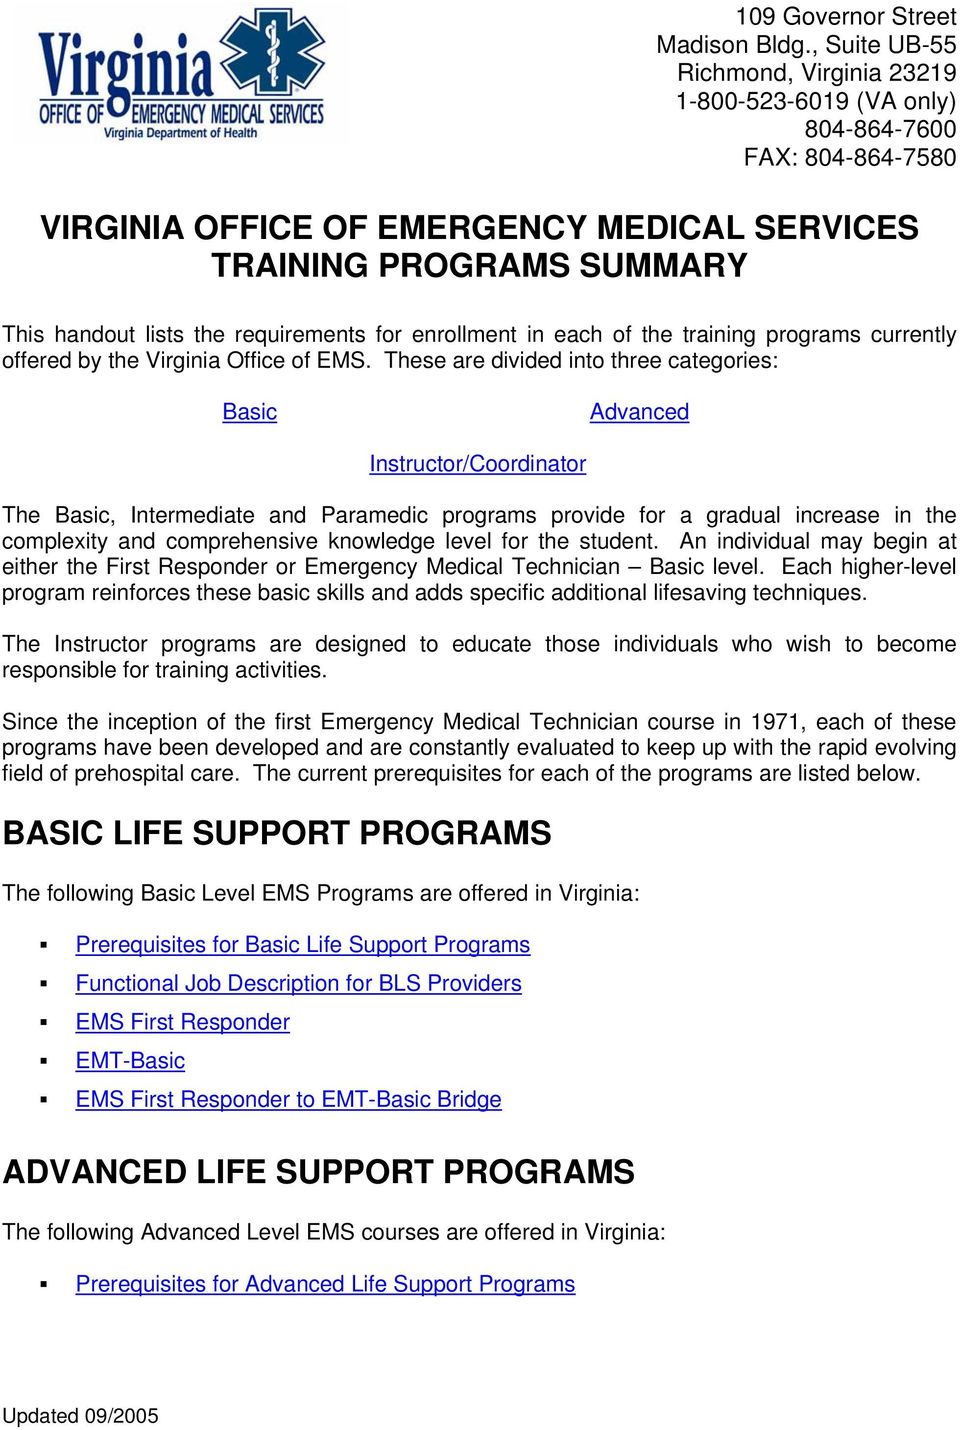 requirements for enrollment in each of the training programs currently offered by the Virginia Office of EMS.